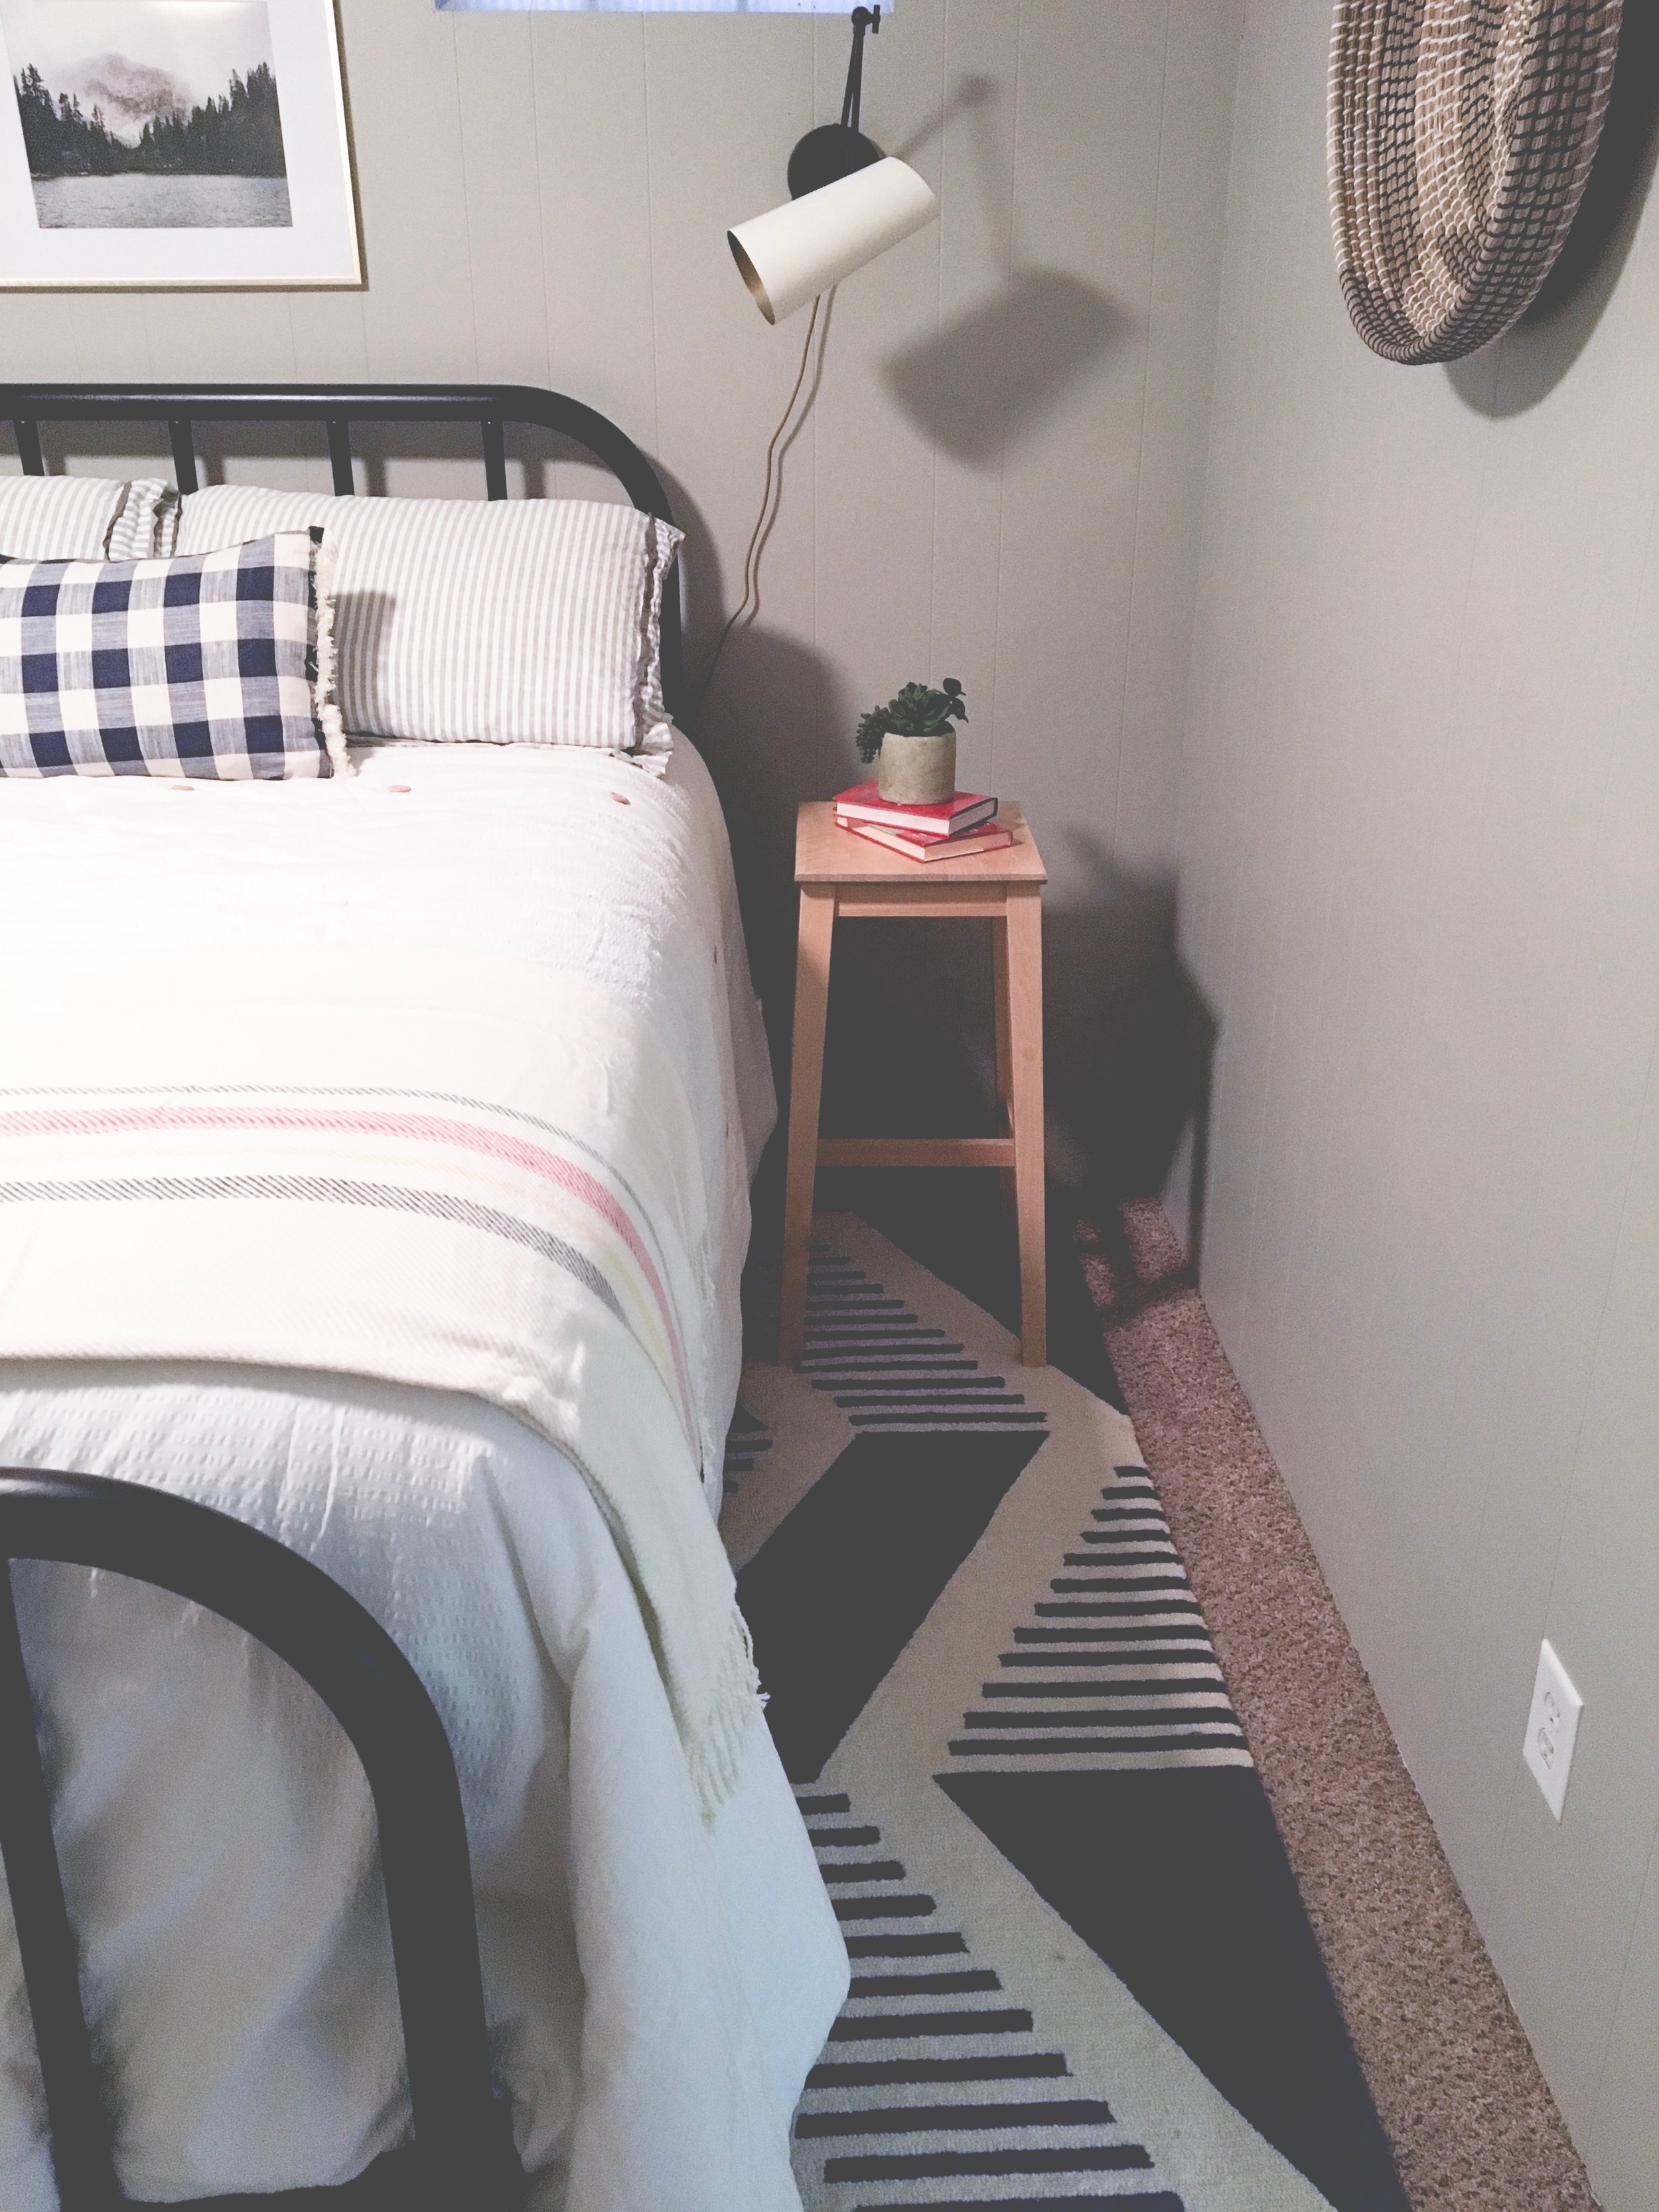 Our boring guest room gets a whole new modern cozy chic cabin look! Learn how to redecorate your guest room so it feels cozy and welcoming.